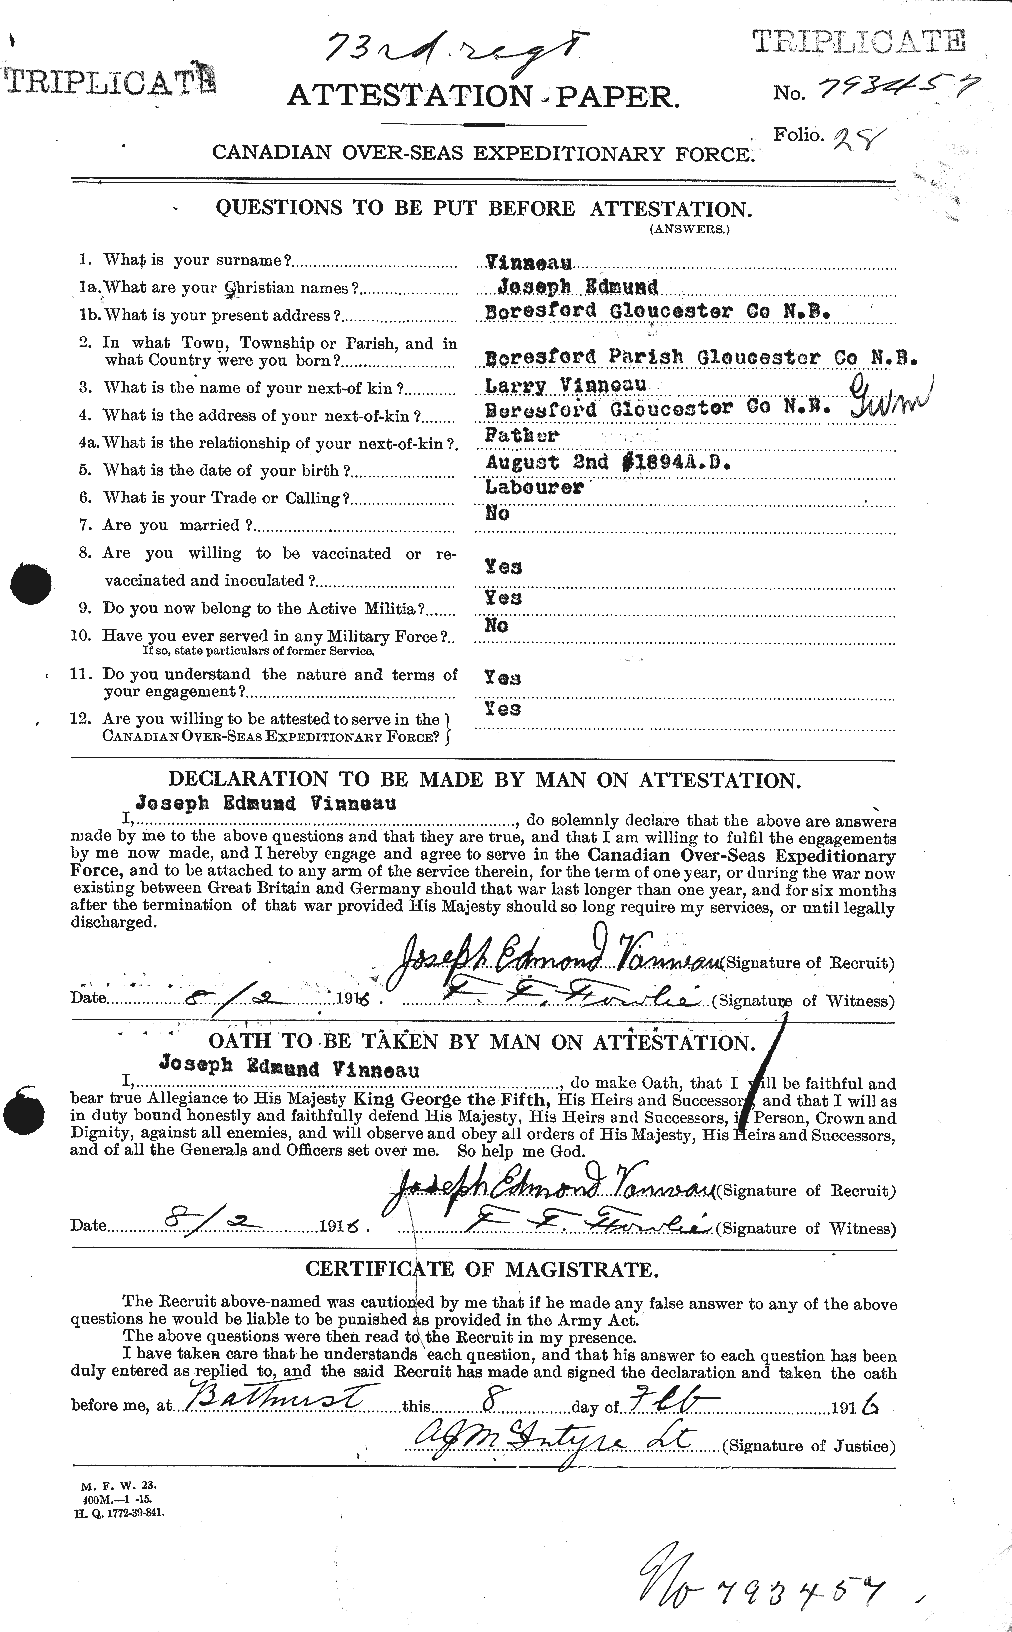 Personnel Records of the First World War - CEF 648656a